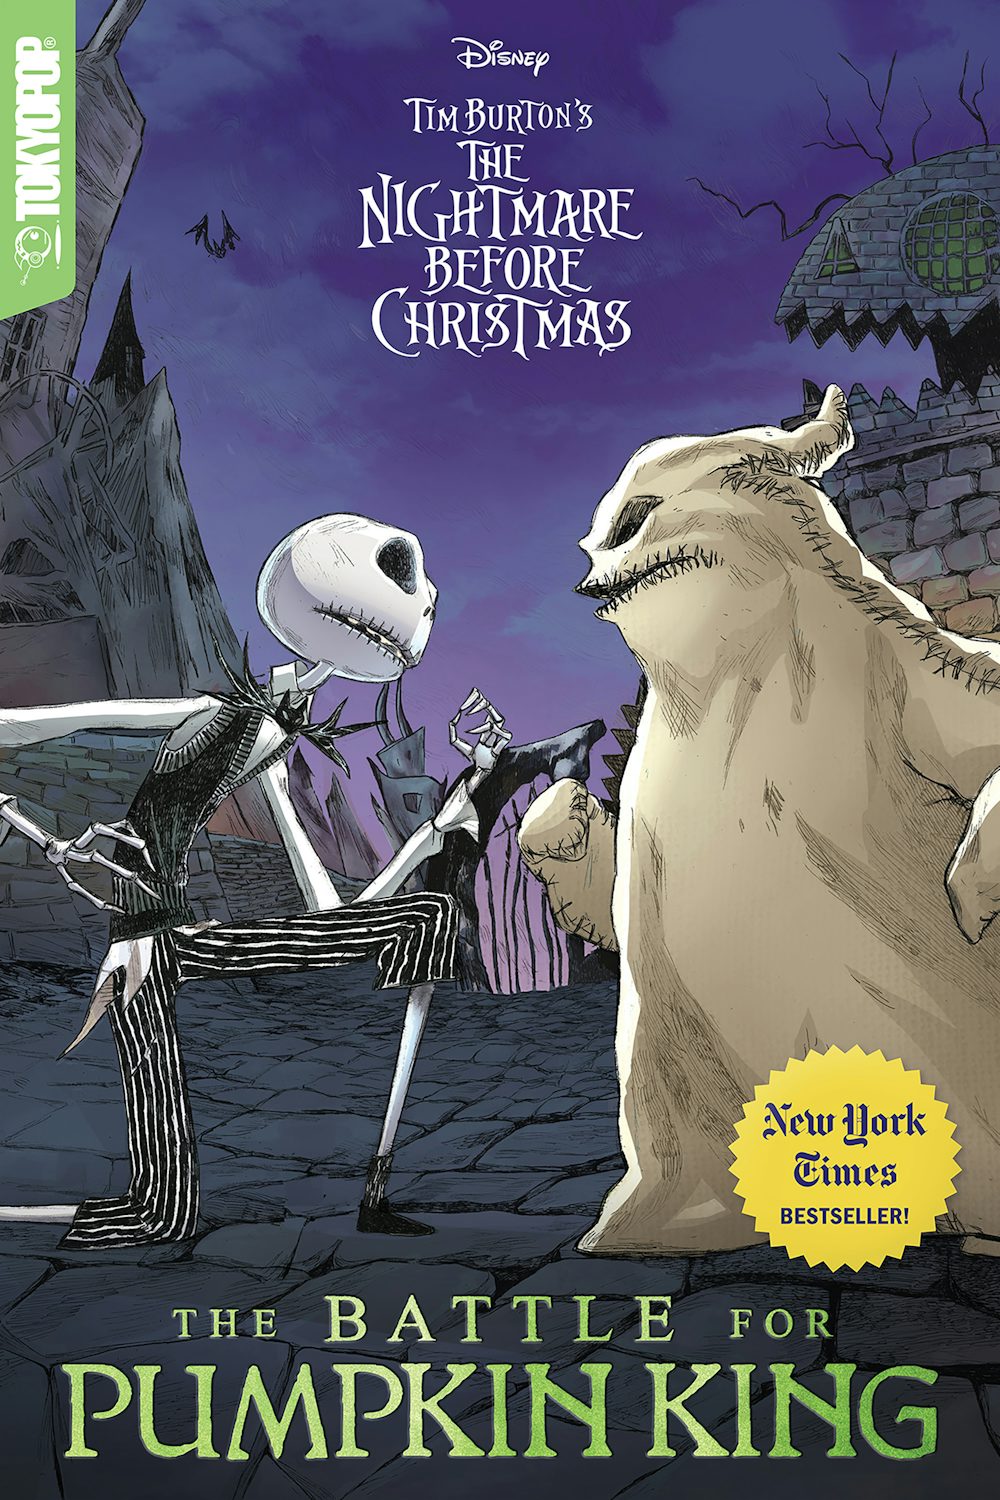 Nightmare Before Christmas: Is live-action 'Nightmare Before Christmas'  movie starring Johnny Depp in the works? - The Economic Times